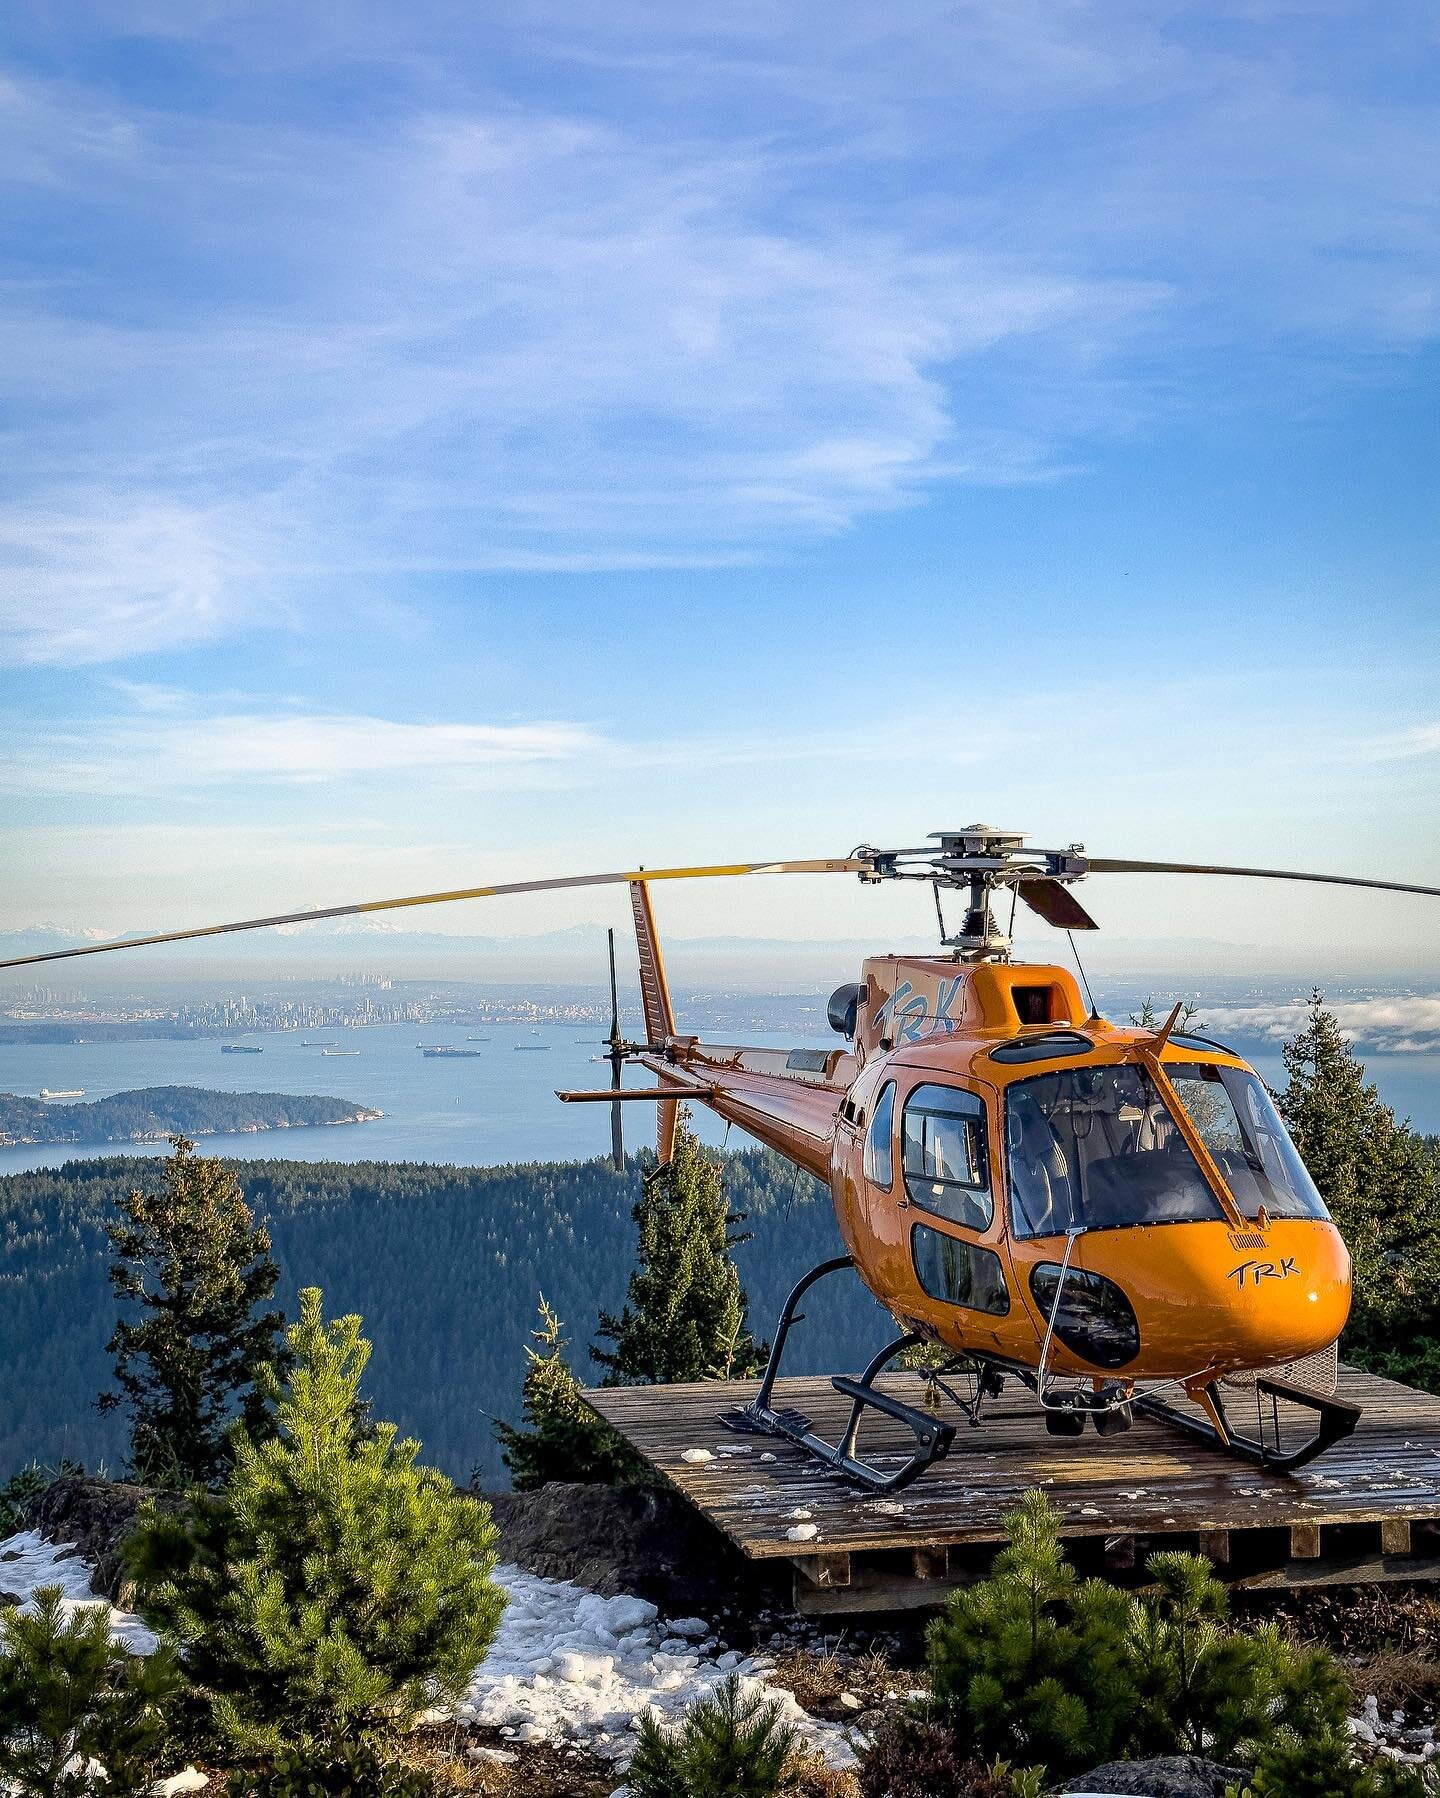 Seeing the majestic mountains and scenic coastal skyline from the air is an experience like no other. 😍 The panoramic views and stunning scenery will take your breath away!🏔️

🚁 Helicopters can land in remote mountain locations that are otherwise 